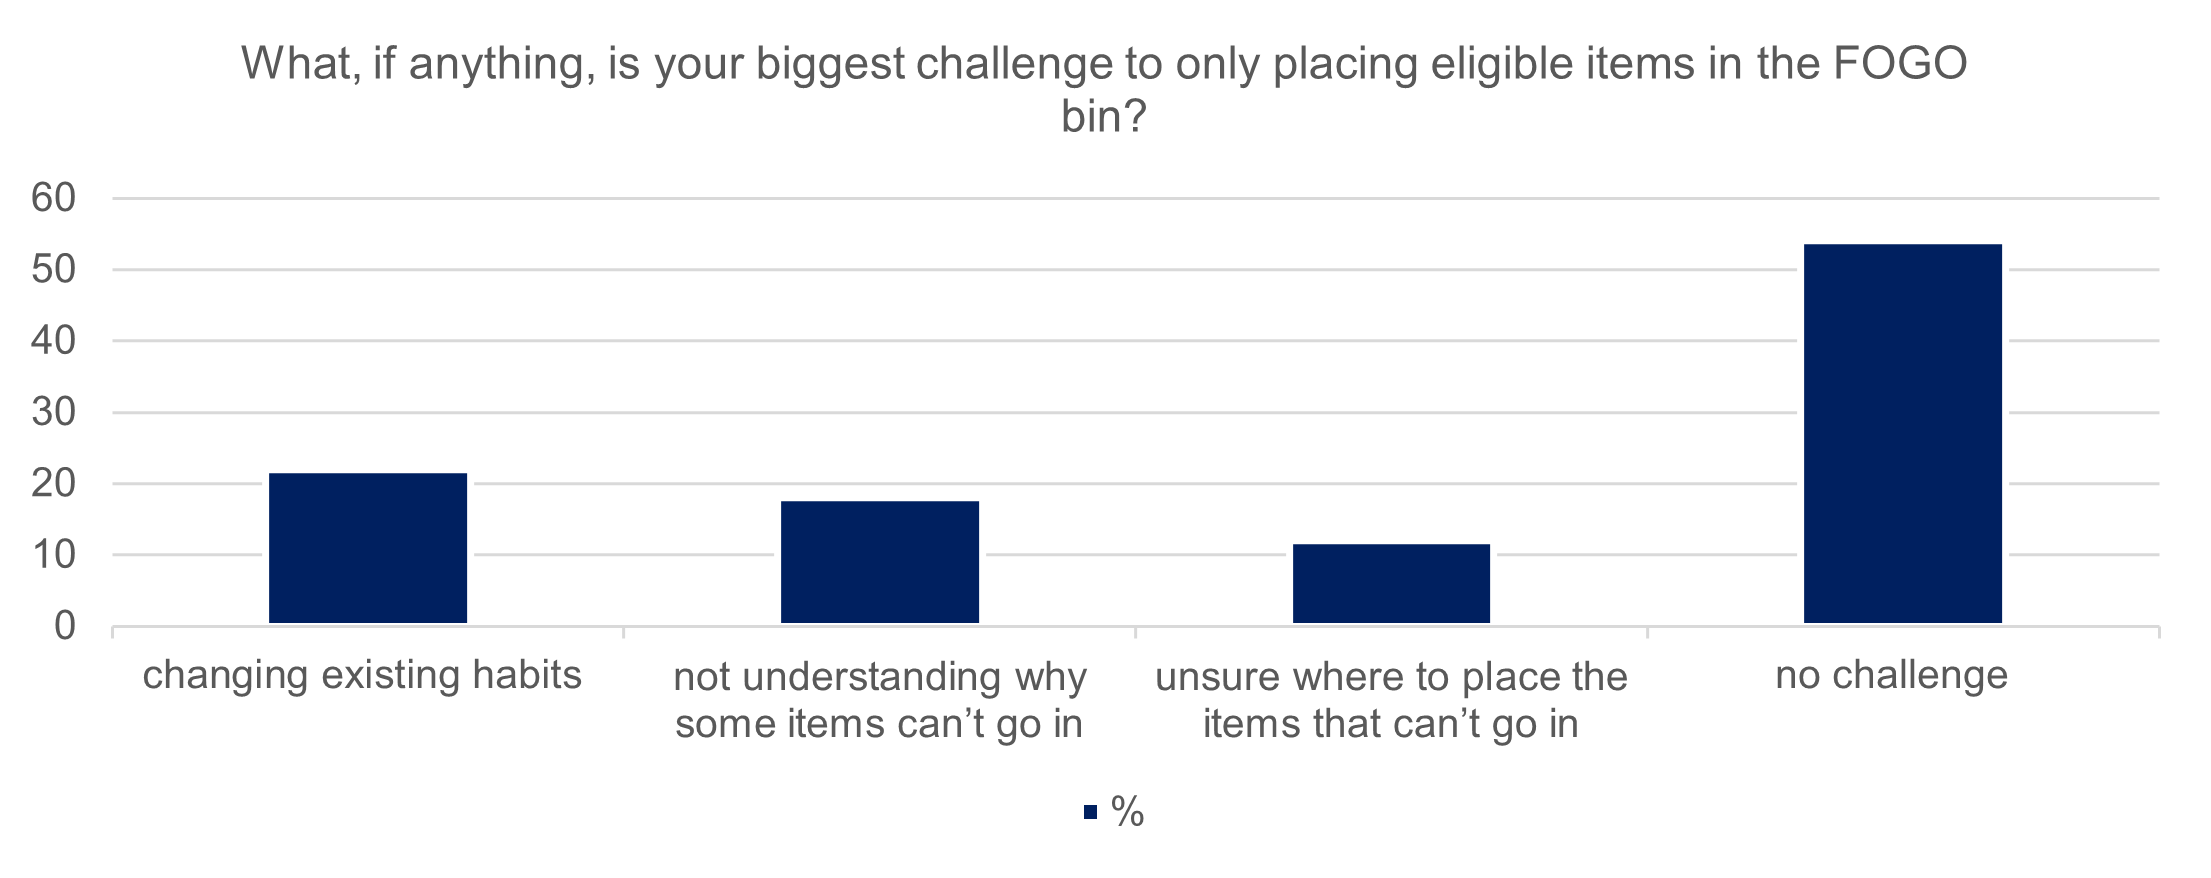 Chart outlining biggest challenges to placing eligible items in the FOGO bin